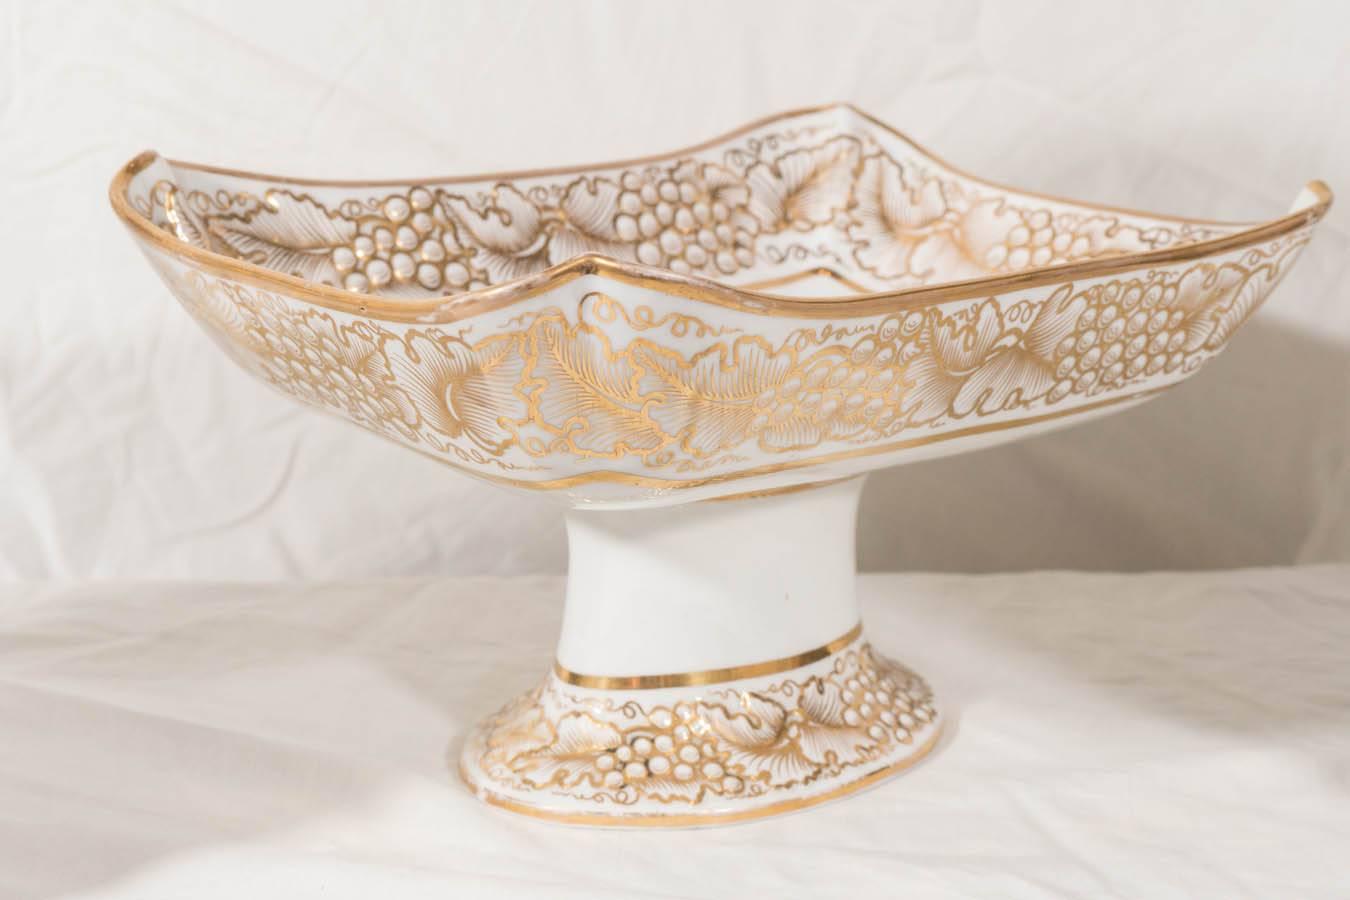 19th Century  Antique English Porcelain Service in a Style Similar to the Danish Flora Danica